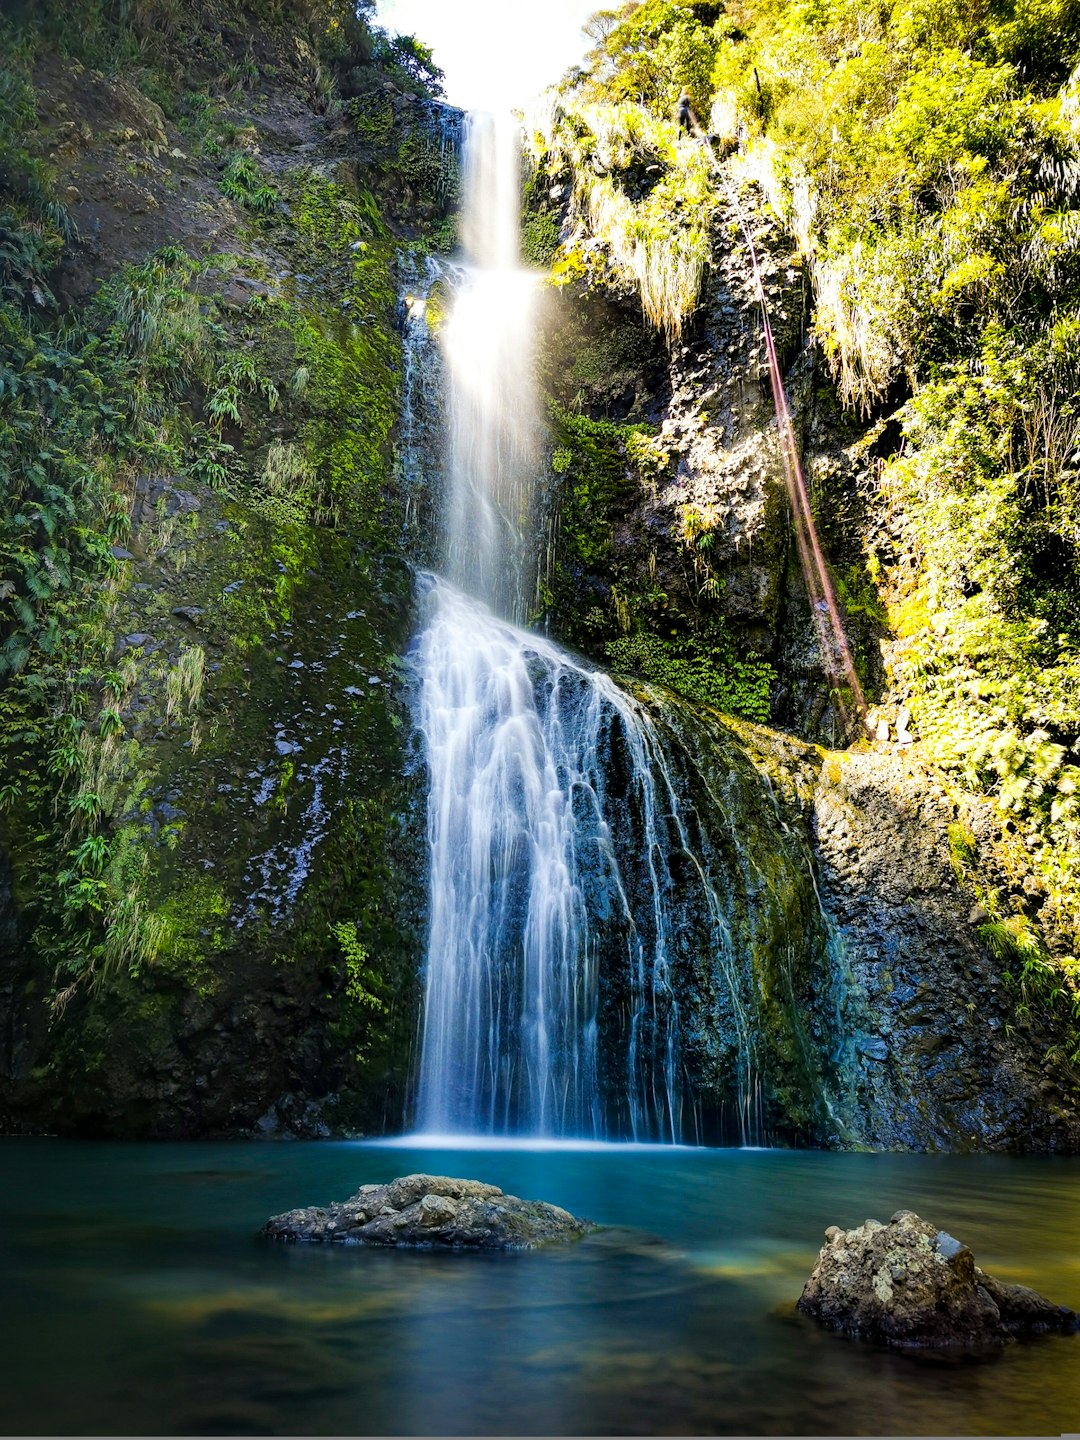 Travel Tips and Stories of Kitekite Falls in New Zealand